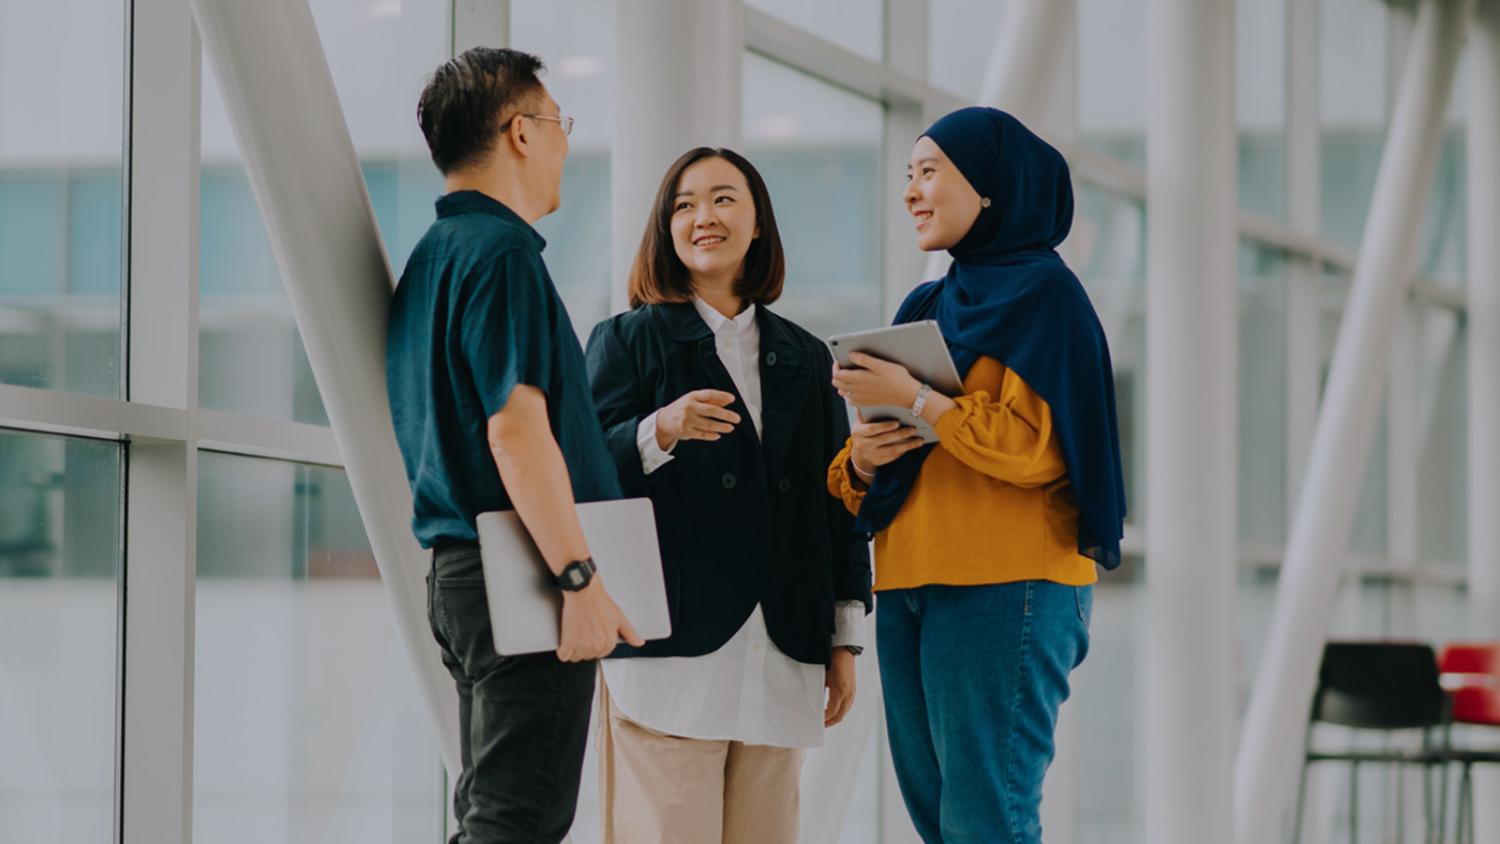 The SkillsFuture Career Transition Programme at NTU’s Centre for Professional and Continuing Education allows mid-career professionals to upskill with industry-relevant knowledge and pivot to new roles in technology.